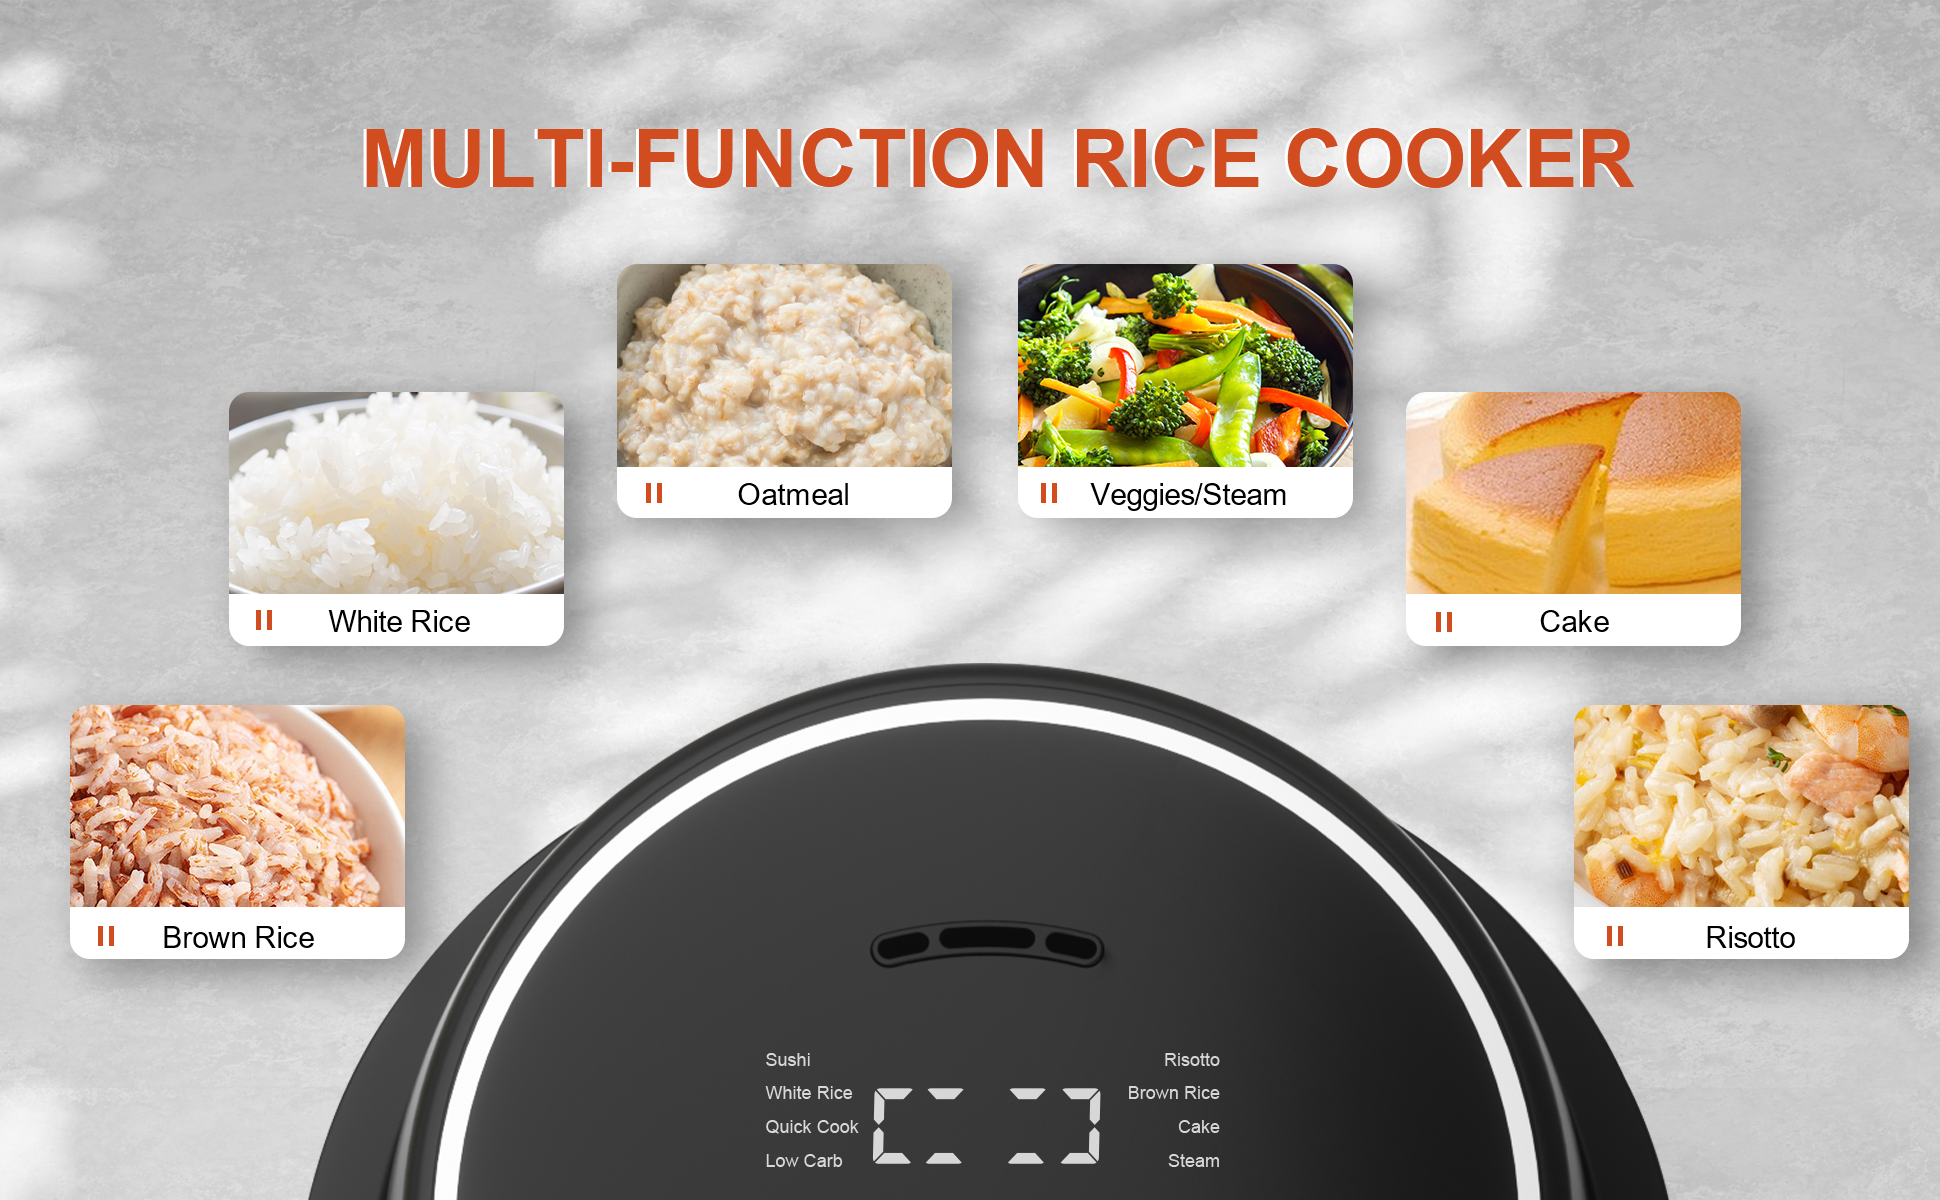 Rice Cooker Small, YOKEKON Low Carb 3 Cup Rice Cooker with Stainless Steel  Steamer, 8-in-1 Japanese Rice Maker, Warmer, Induction Heating, 24H Delay